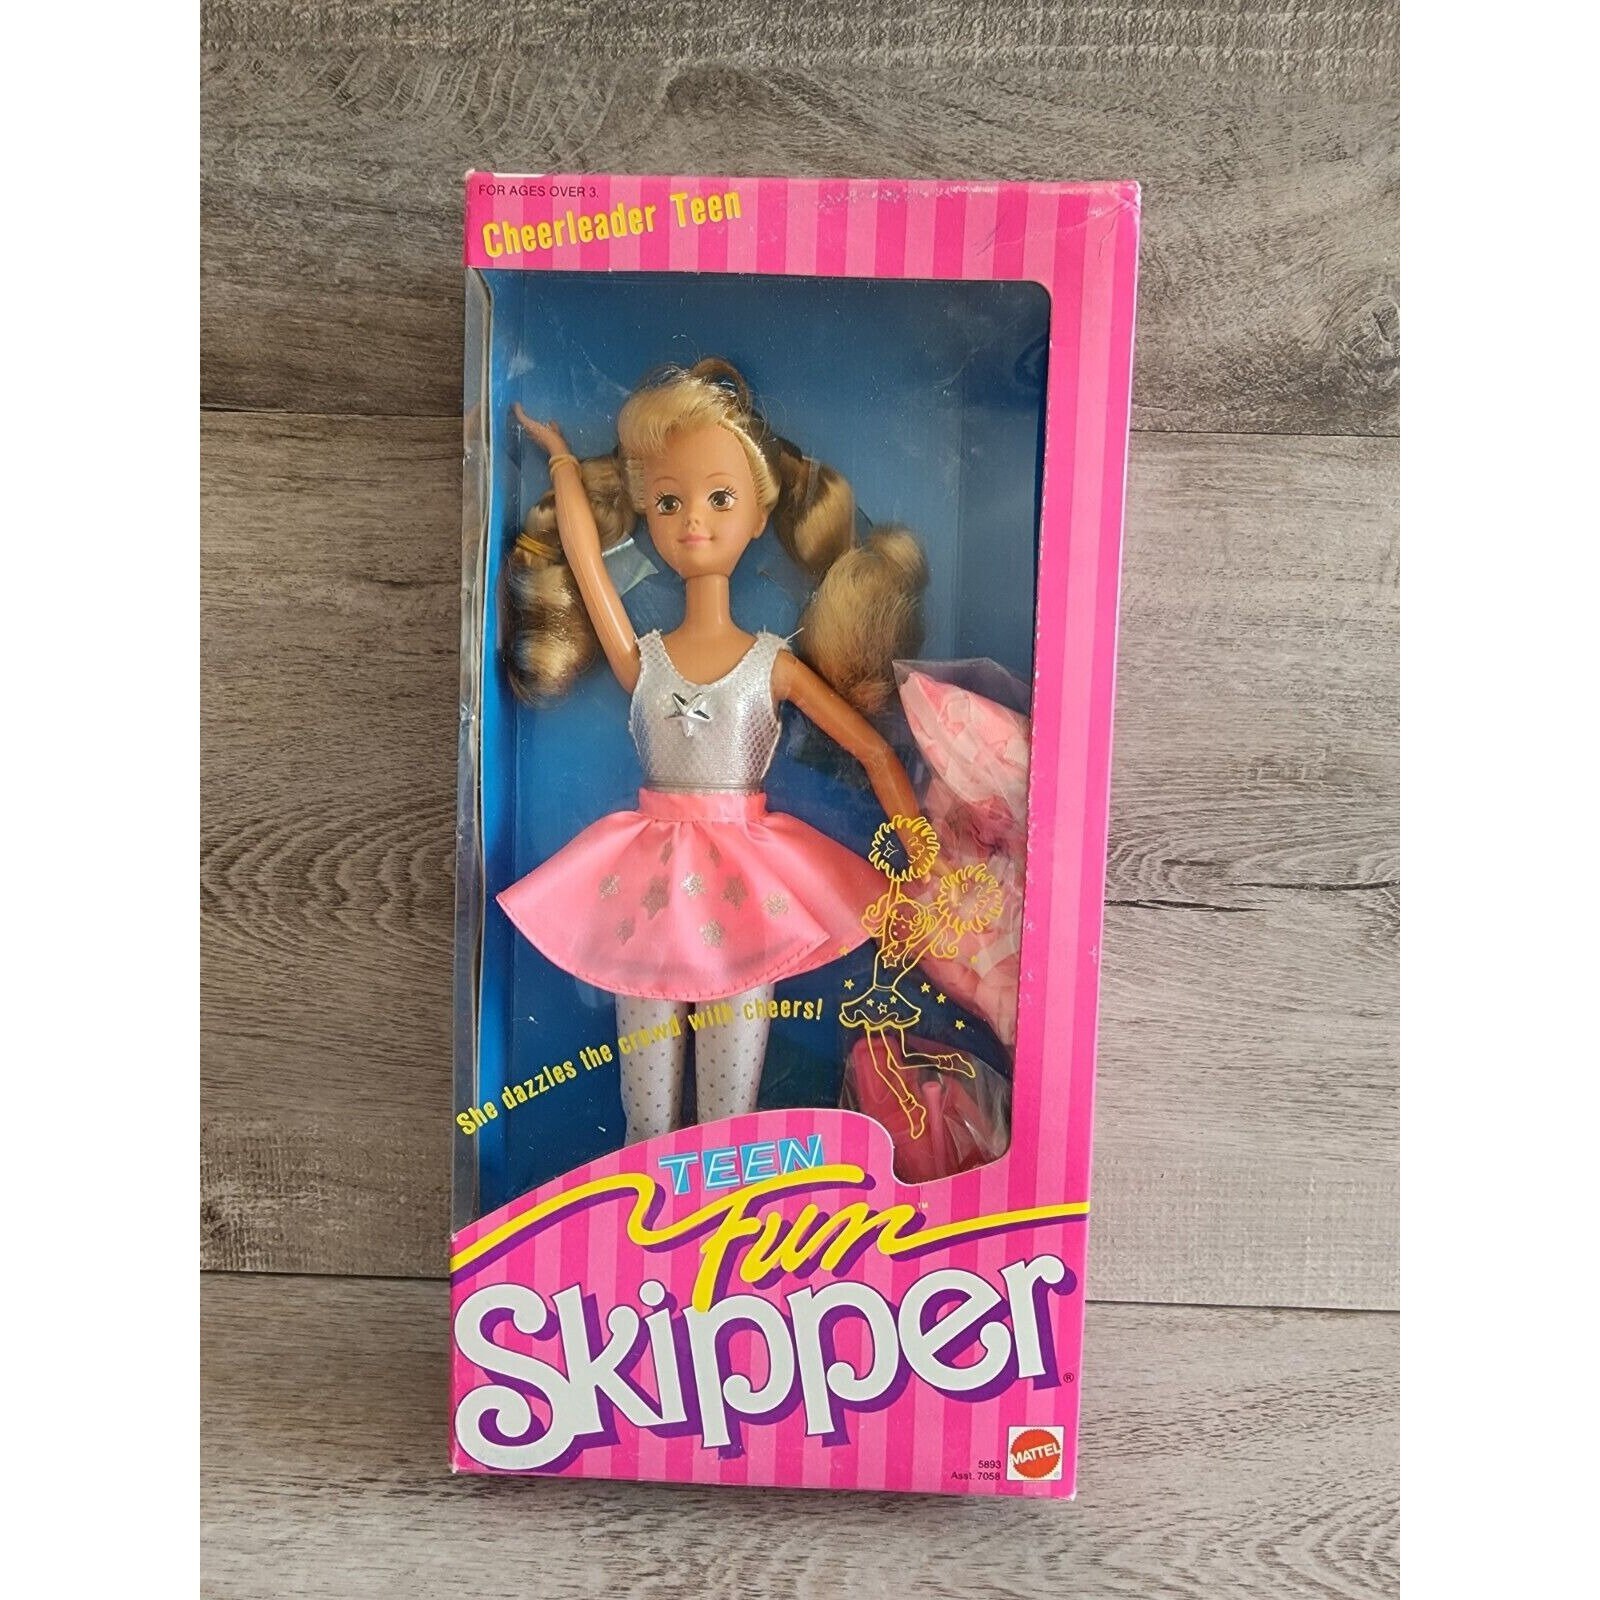 Vintage Barbie, Skipper, Blond, Collectible Doll, Old Toy, for Her, Mothers  Day Gift, Birthday Gift, Free USA Shipping, Mattel, Teen Fashion 